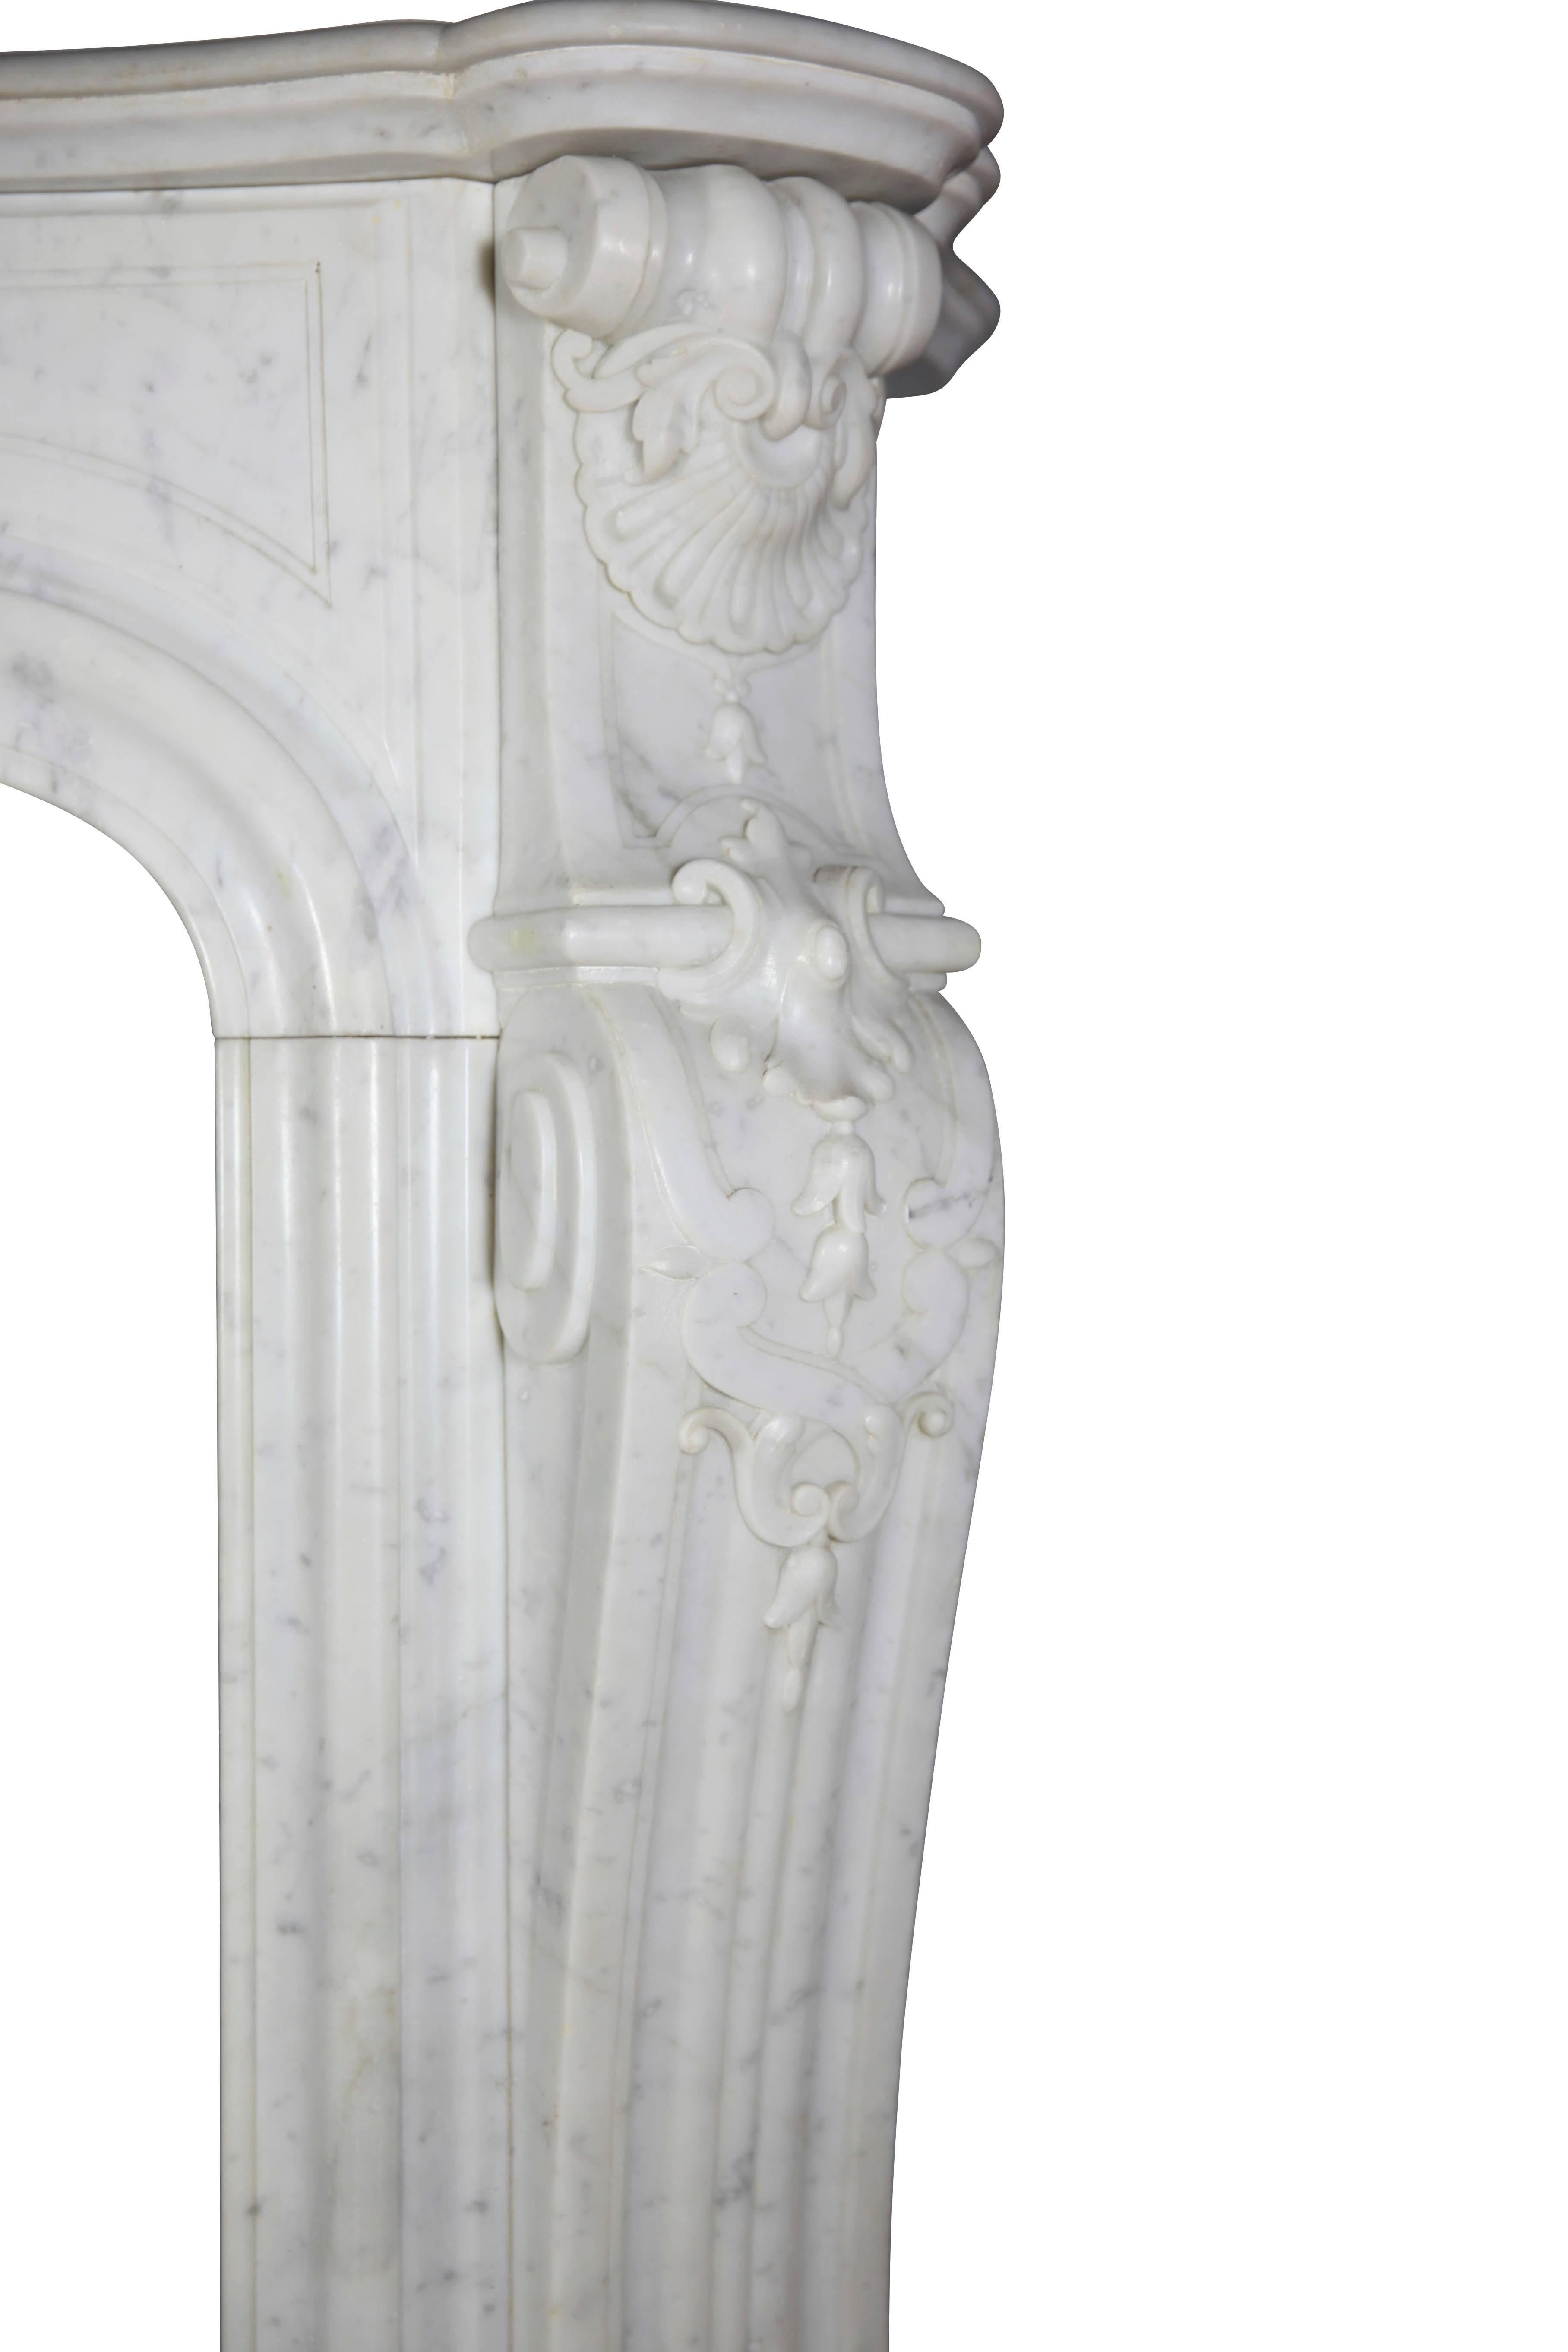 French Grand Interior Antique Fireplace Surround in Carrara White Marble For Sale 3